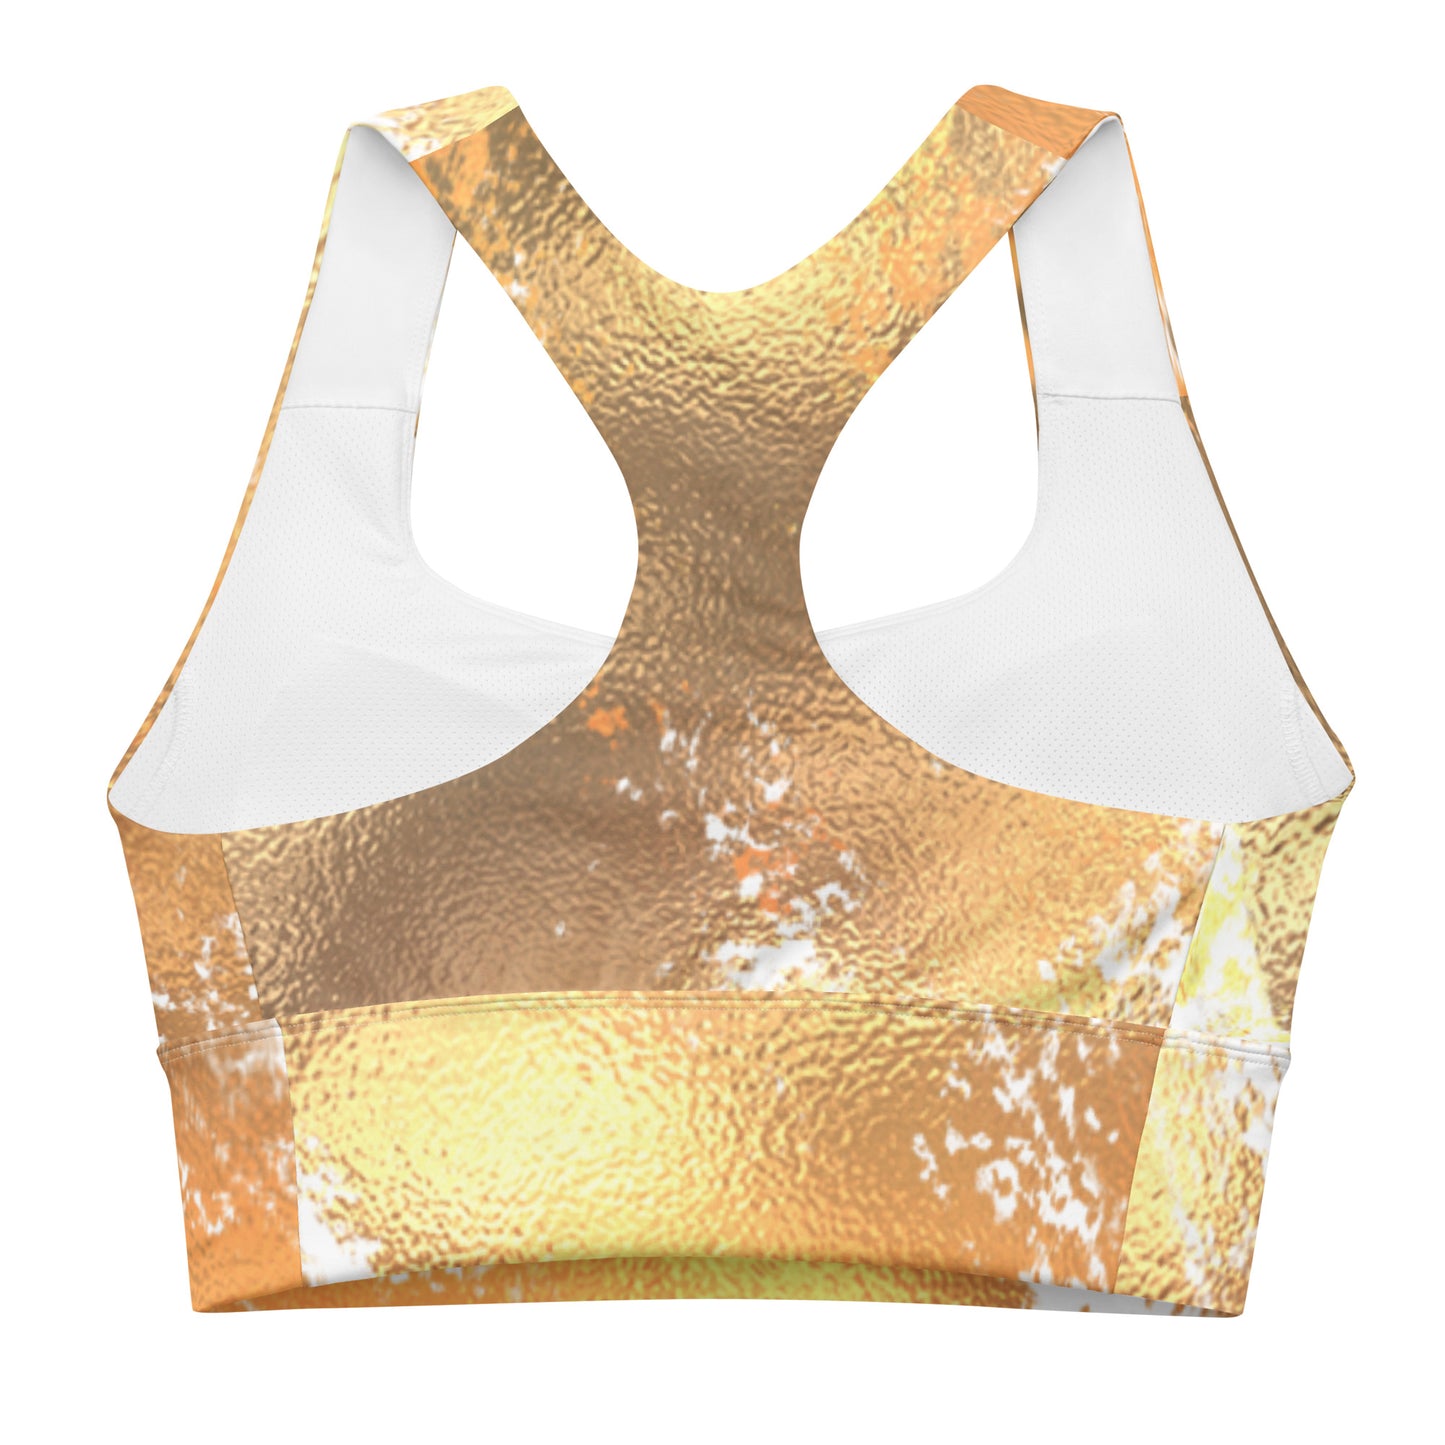 Longline Sports Bras, Compressing Fabric, Double Layered, great support while running.